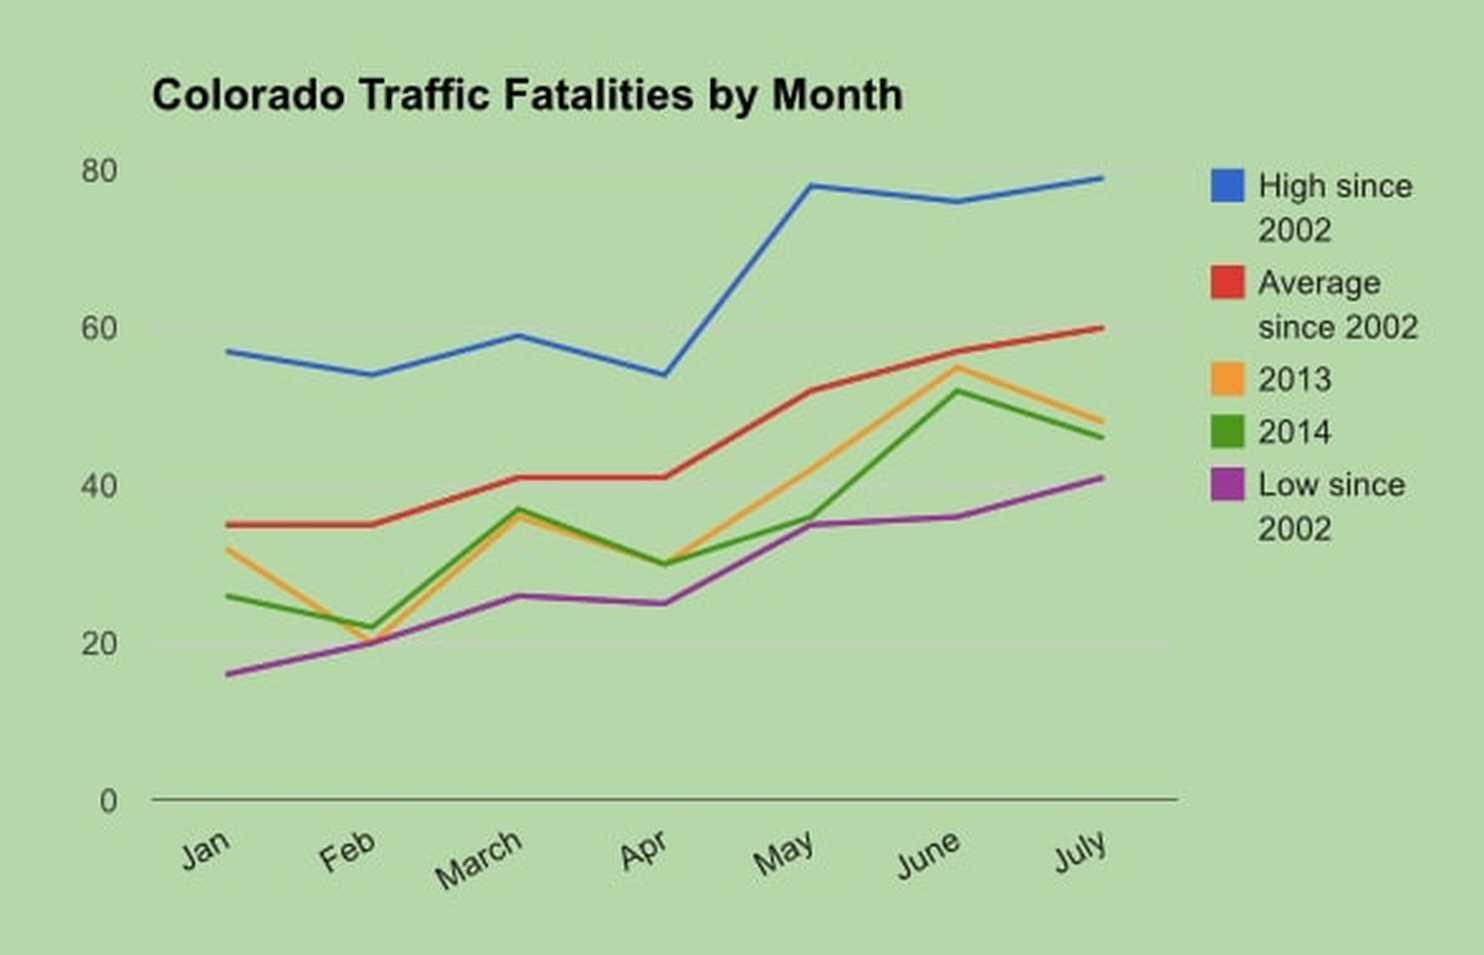 Opinion | Since marijuana legalization, highway fatalities in Colorado are at near-historic lows